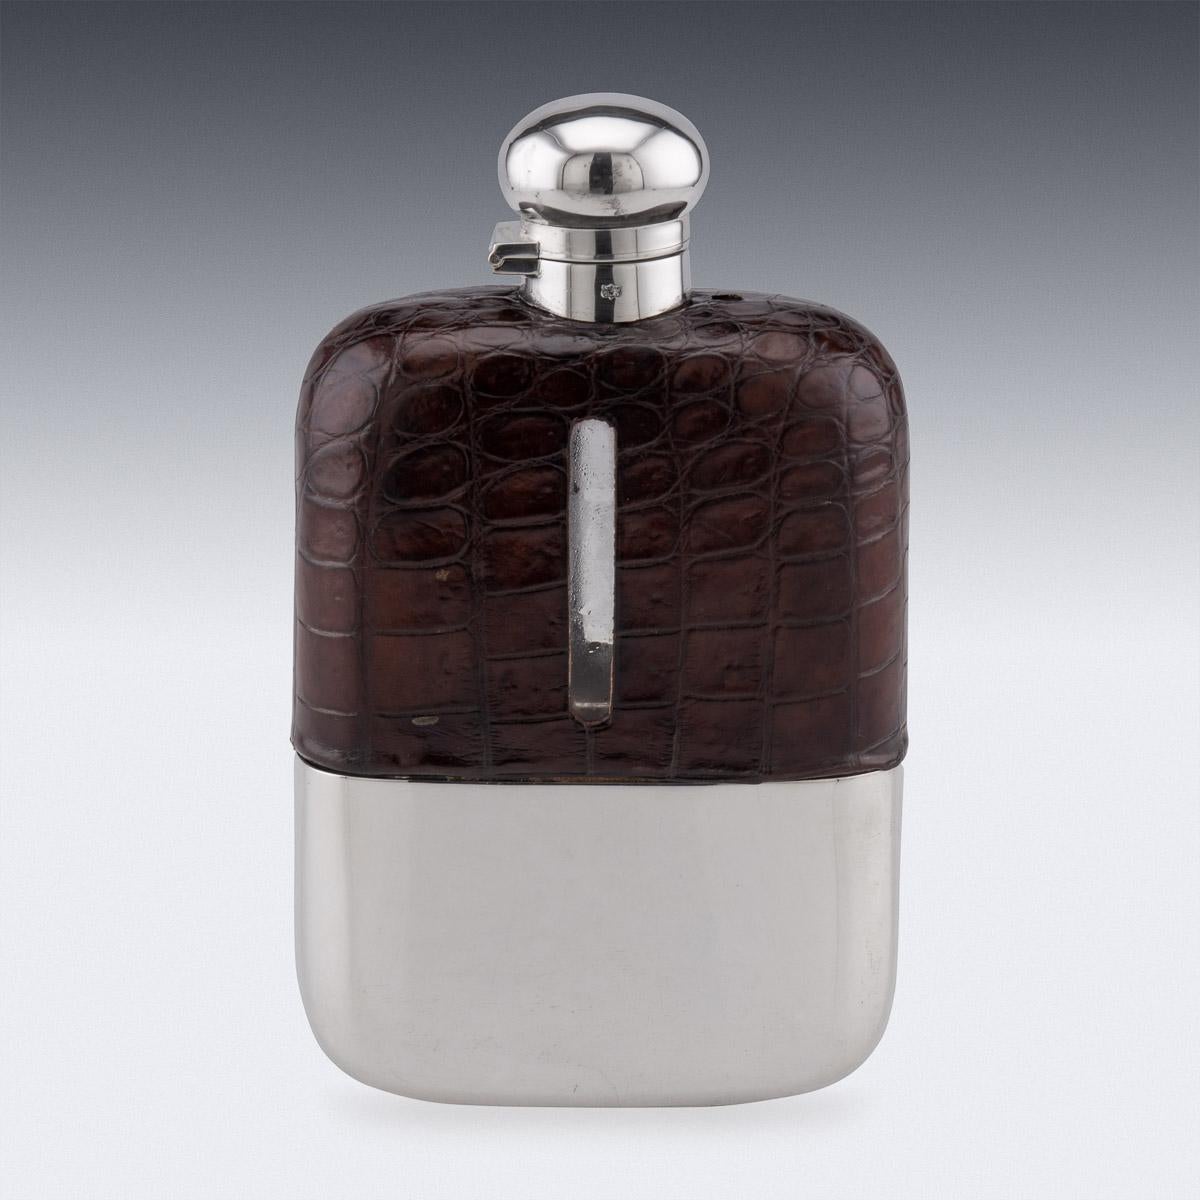 20th century Edwardian silver plated, blown glass and sumptuous crocodile leather hip flask, unusually large, of rounded rectangular form, with a pull off cup with gilt interior, top mounted with a large hinged lid. Hallmarked with English silver